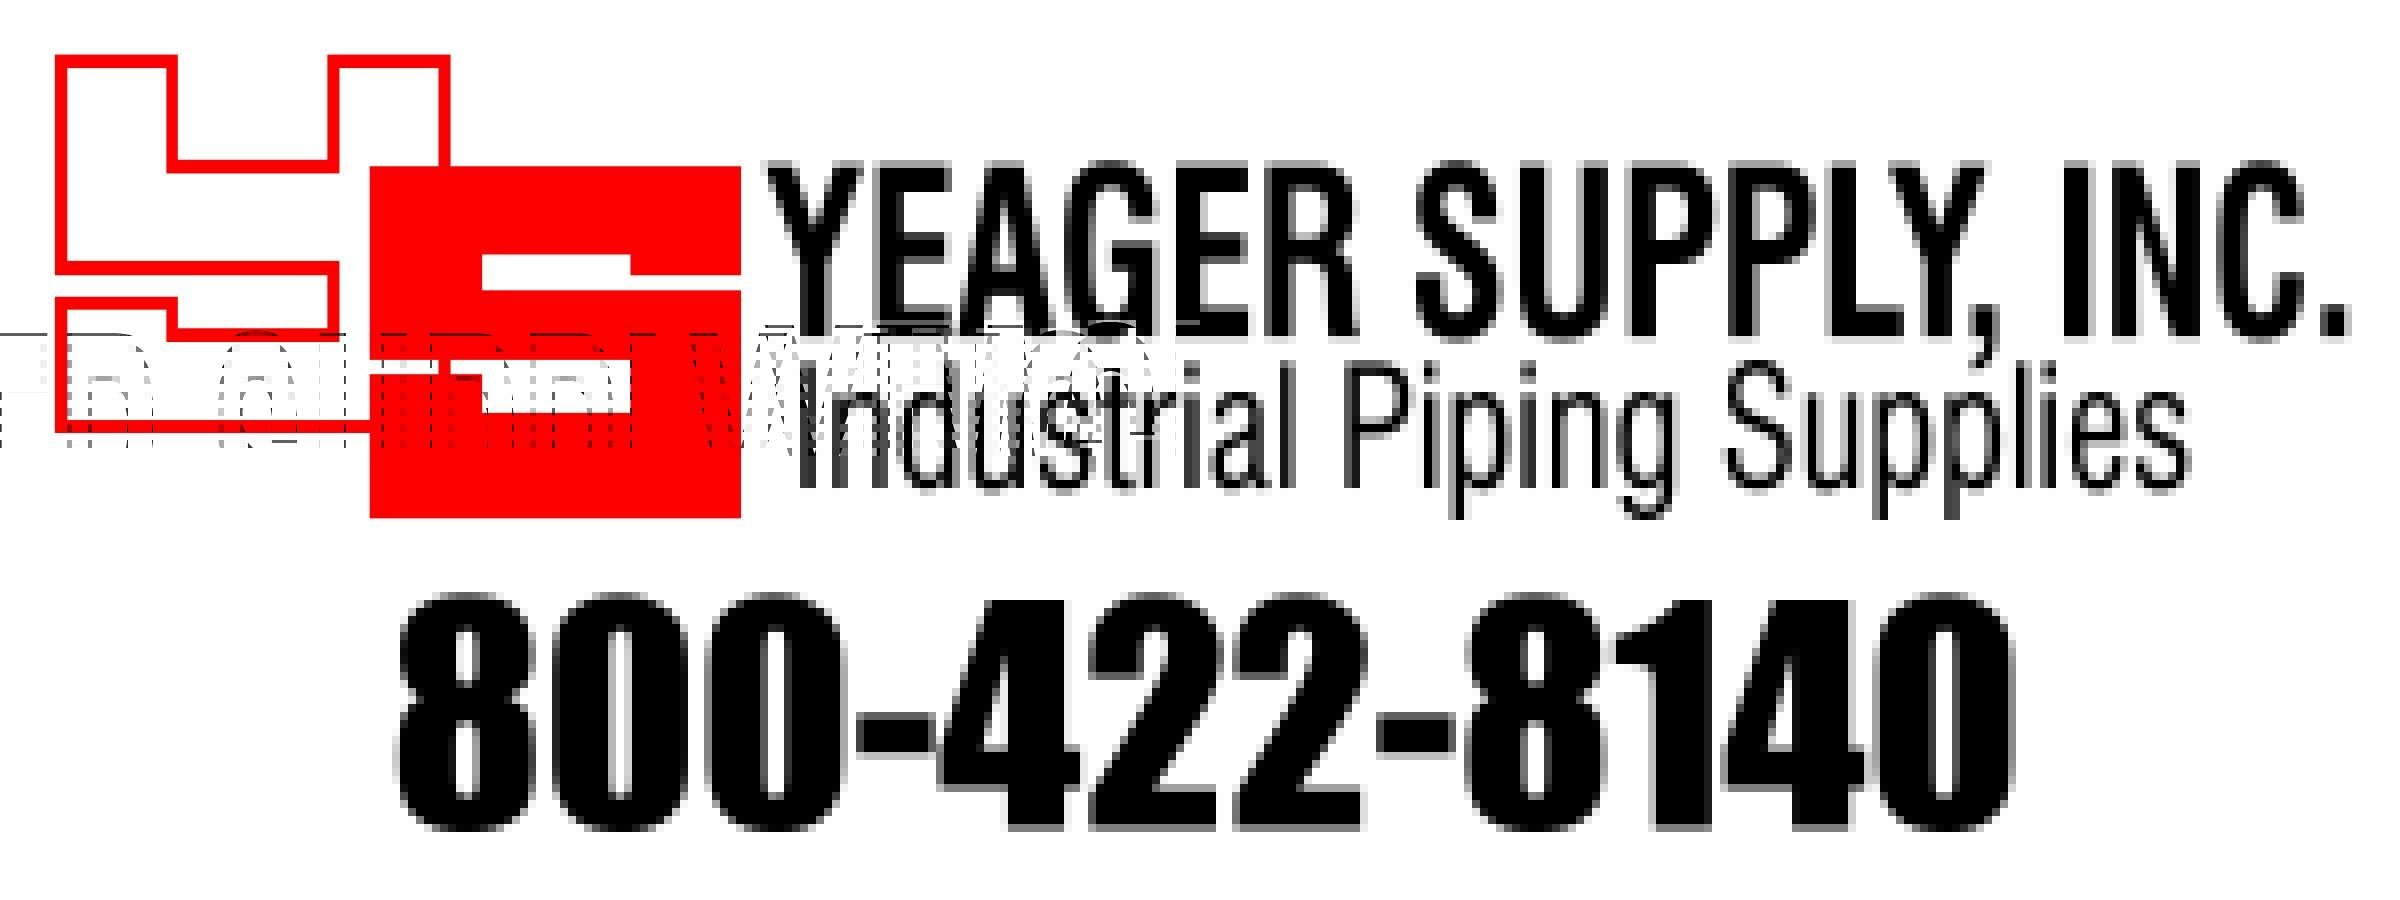 Yeager Supply